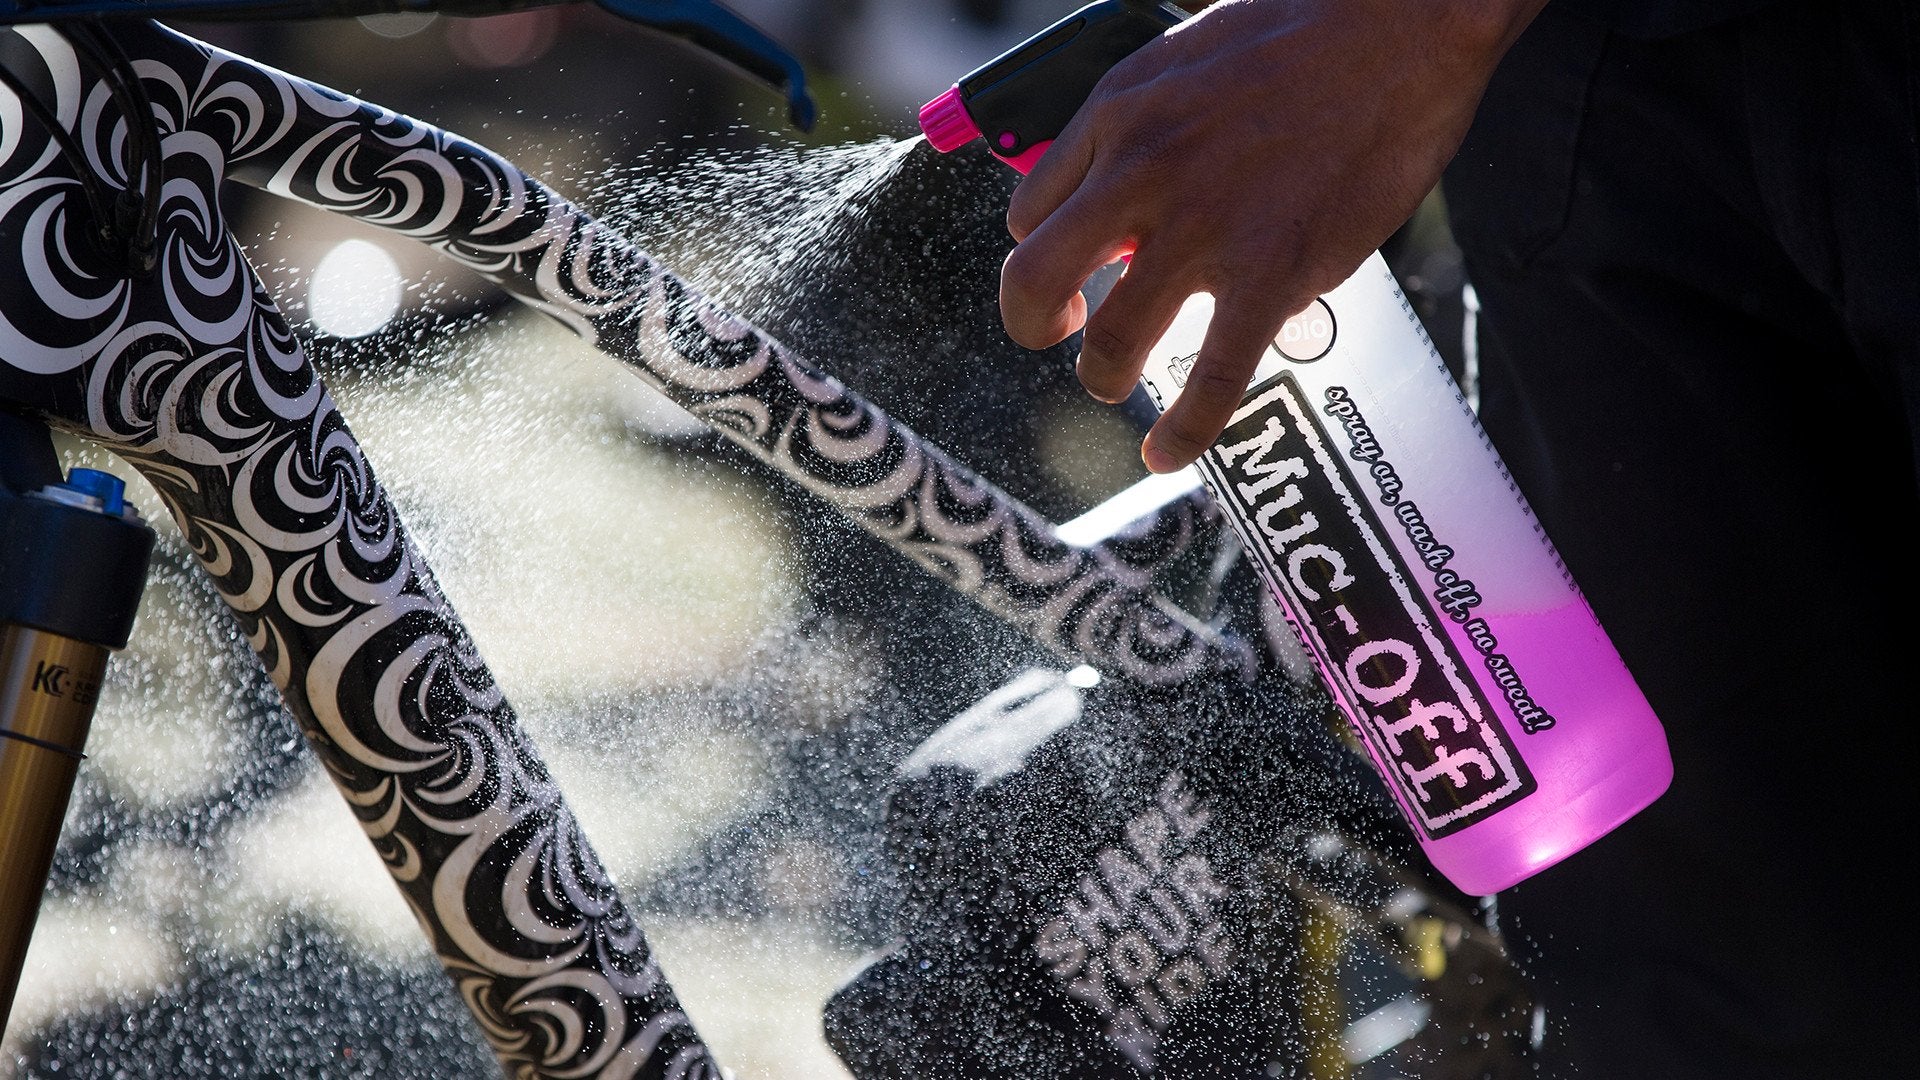 Muc-Off Bike Cleaner Concentrate